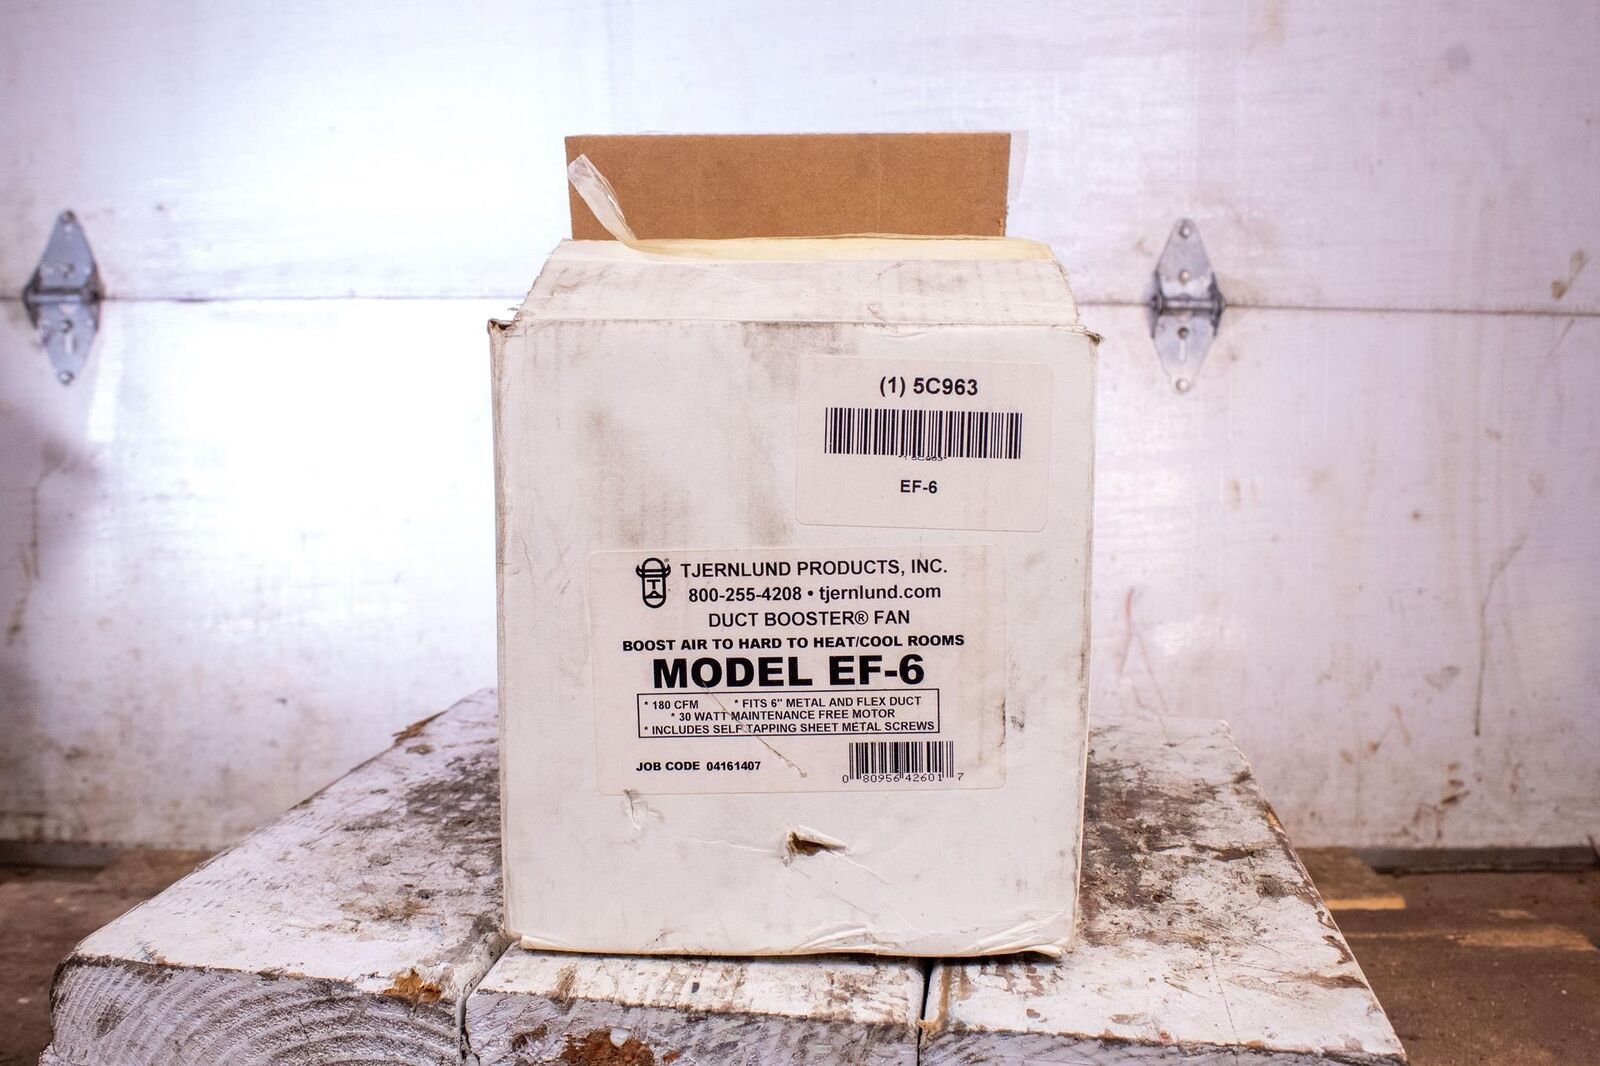 TJERNLUND PRODUCTS, INC. MODEL EF-6 DUCT BOOSTER® FAN (1) 5C963 6\